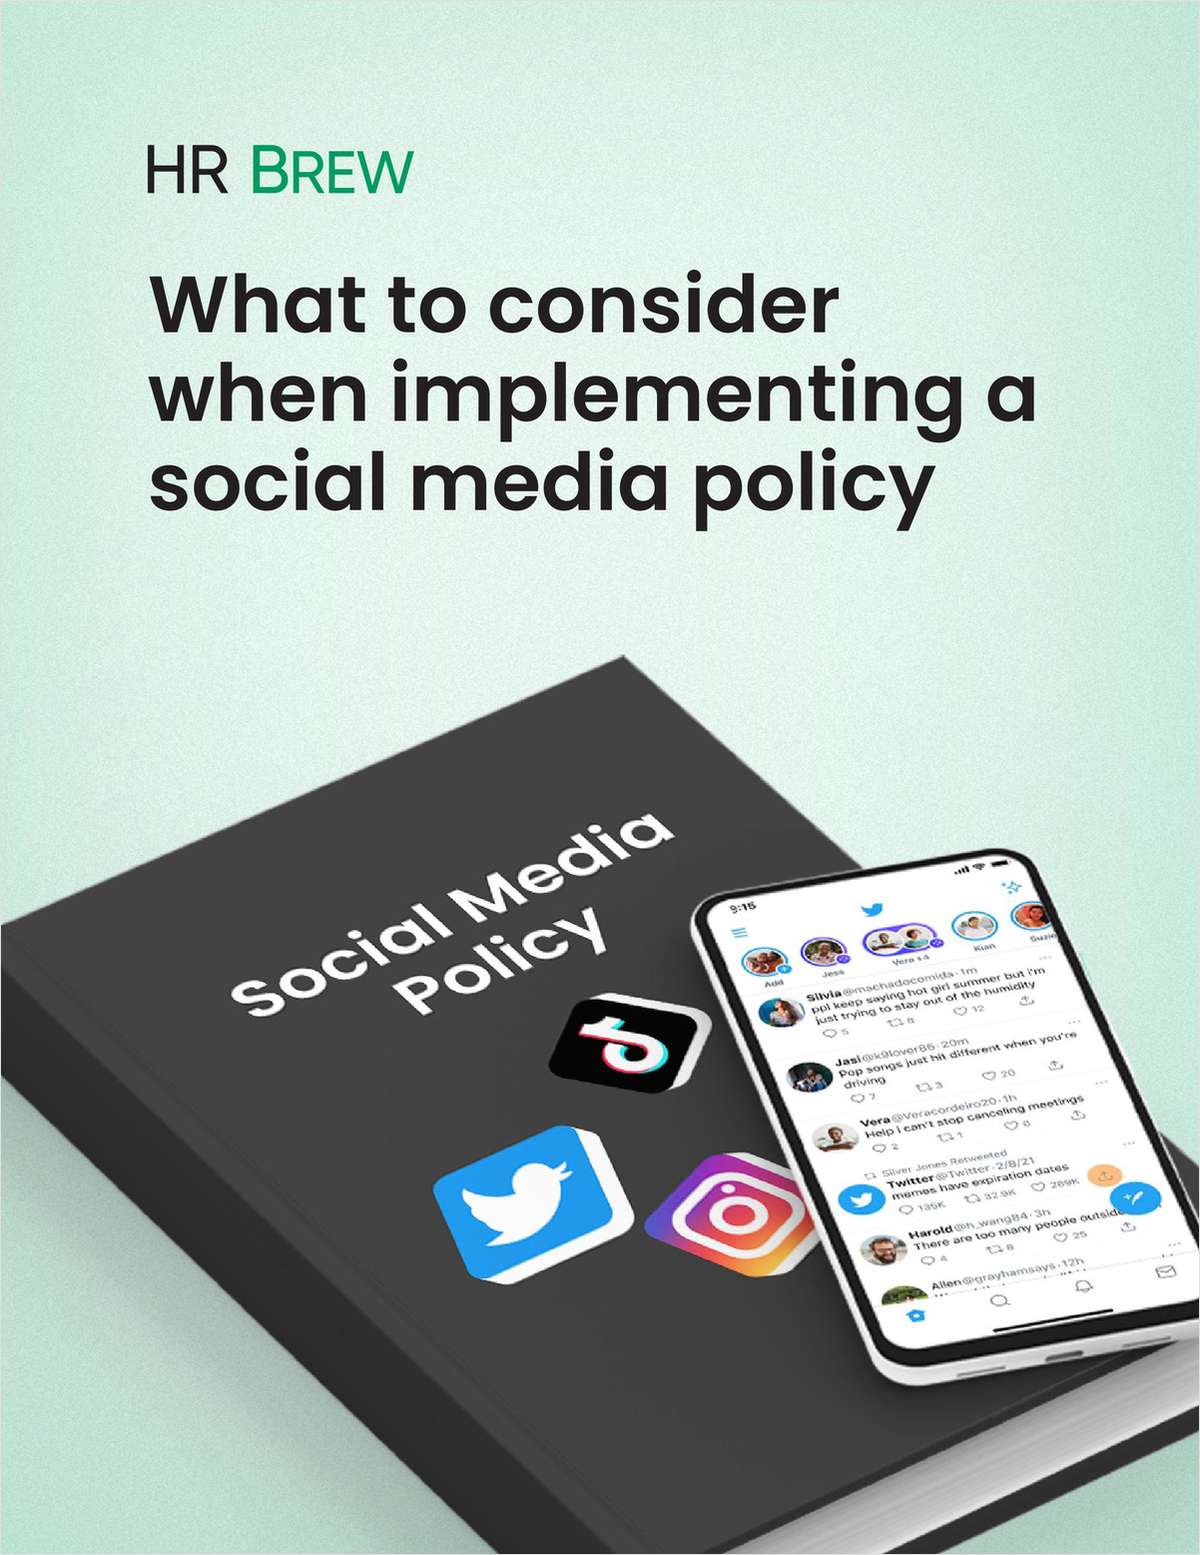 What to consider when implementing a social media policy